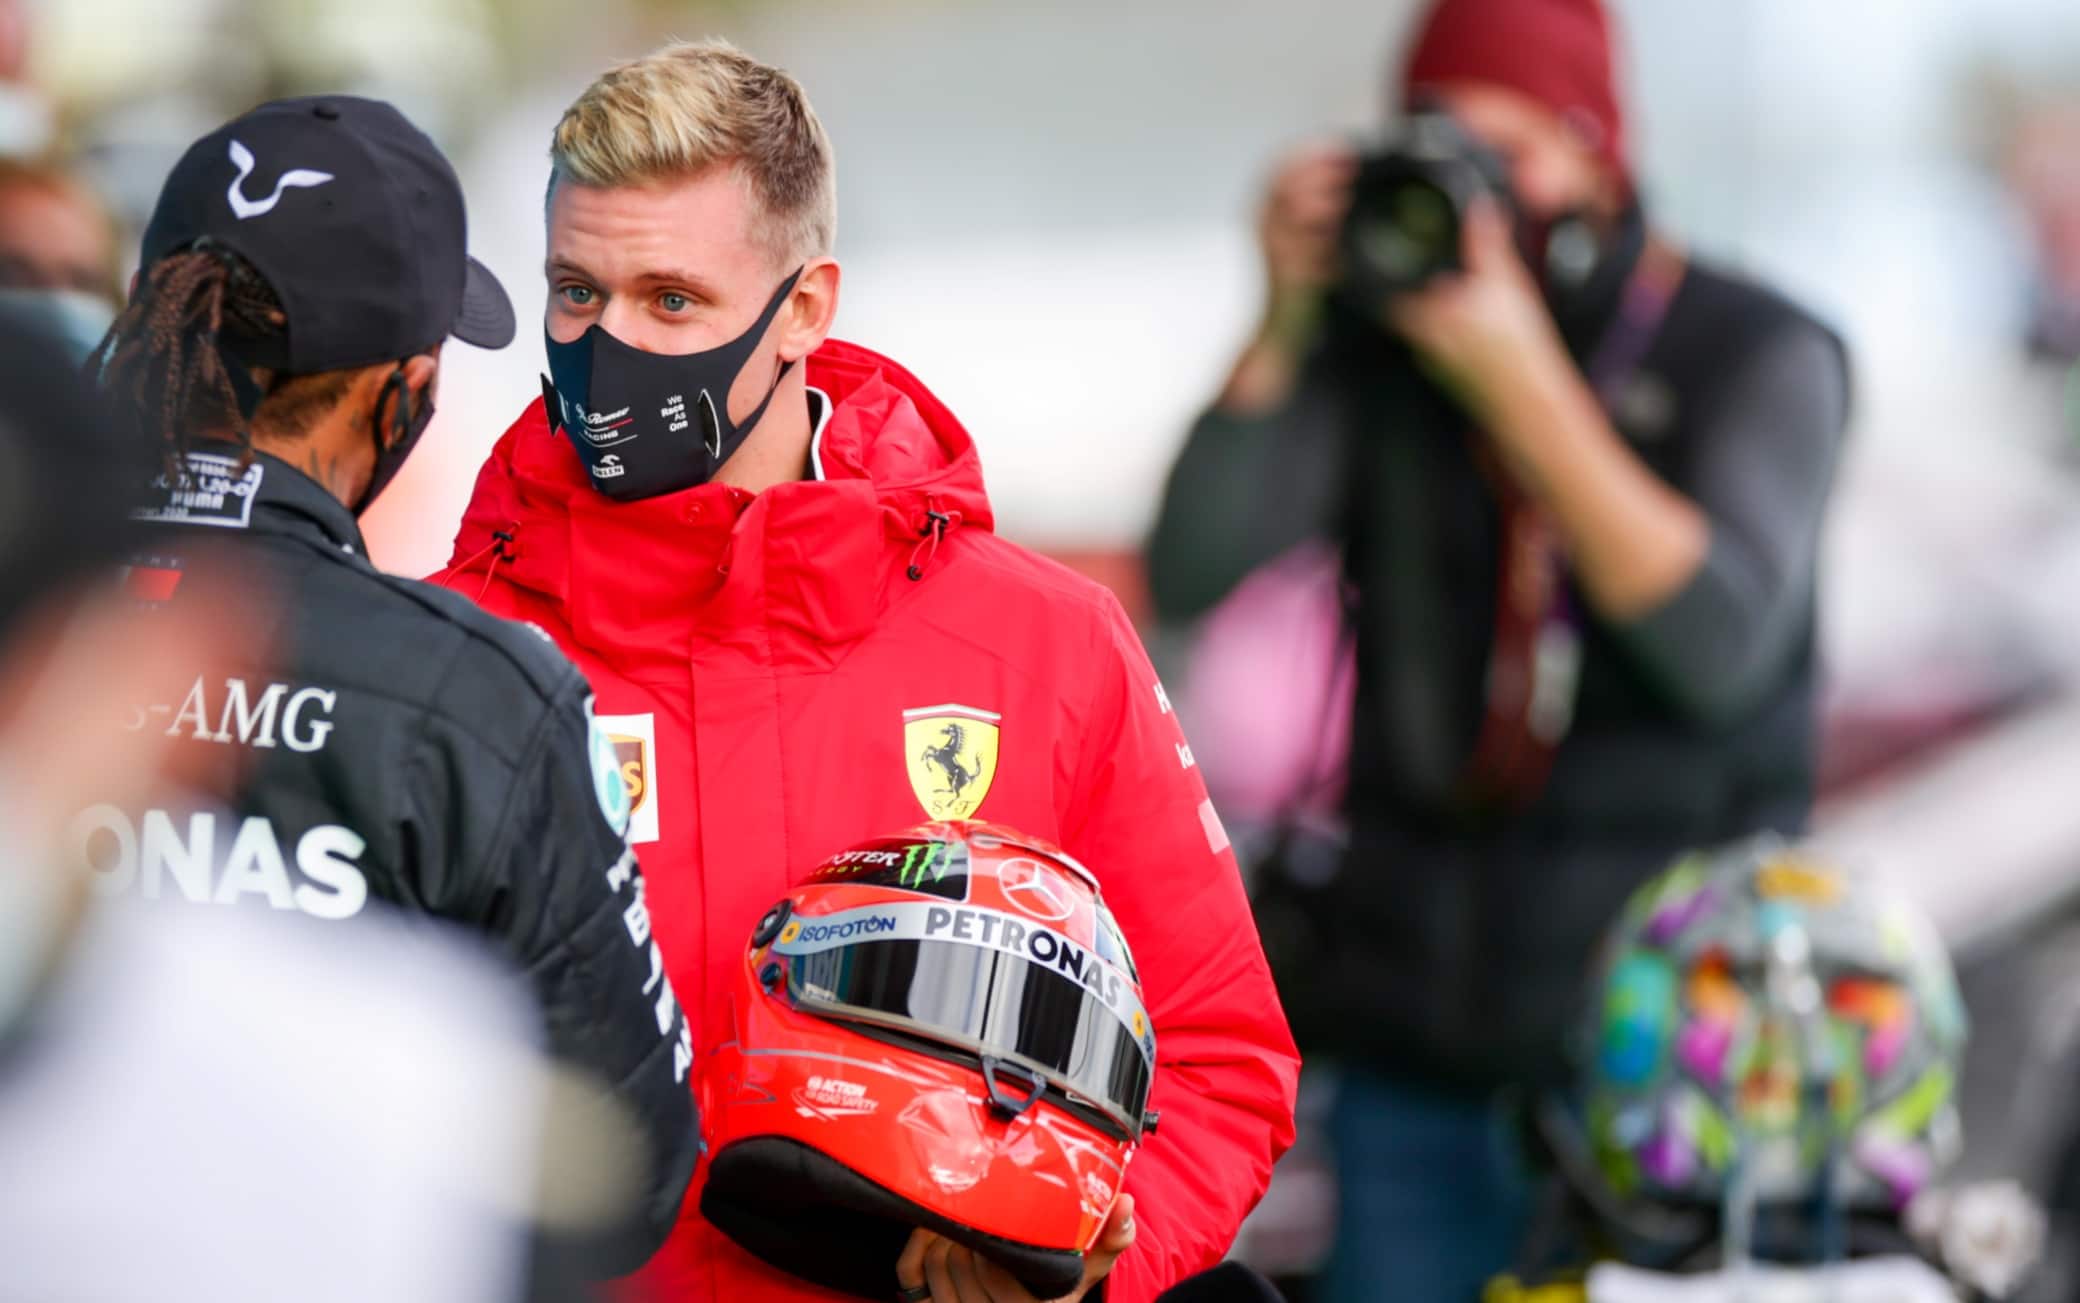 NUERBURG, GERMANY - OCTOBER 11: Mick Schumacher of Germany and Ferrari presents Lewis Hamilton of Mercedes and Great Britain  with his father Michael Schumacher's helmet to celebrate equalling his father's achievement of 91 wins during the F1 Eifel Grand Prix at Nuerburgring on October 11, 2020 in Nuerburg, Germany. (Photo by Peter Fox/Getty Images)